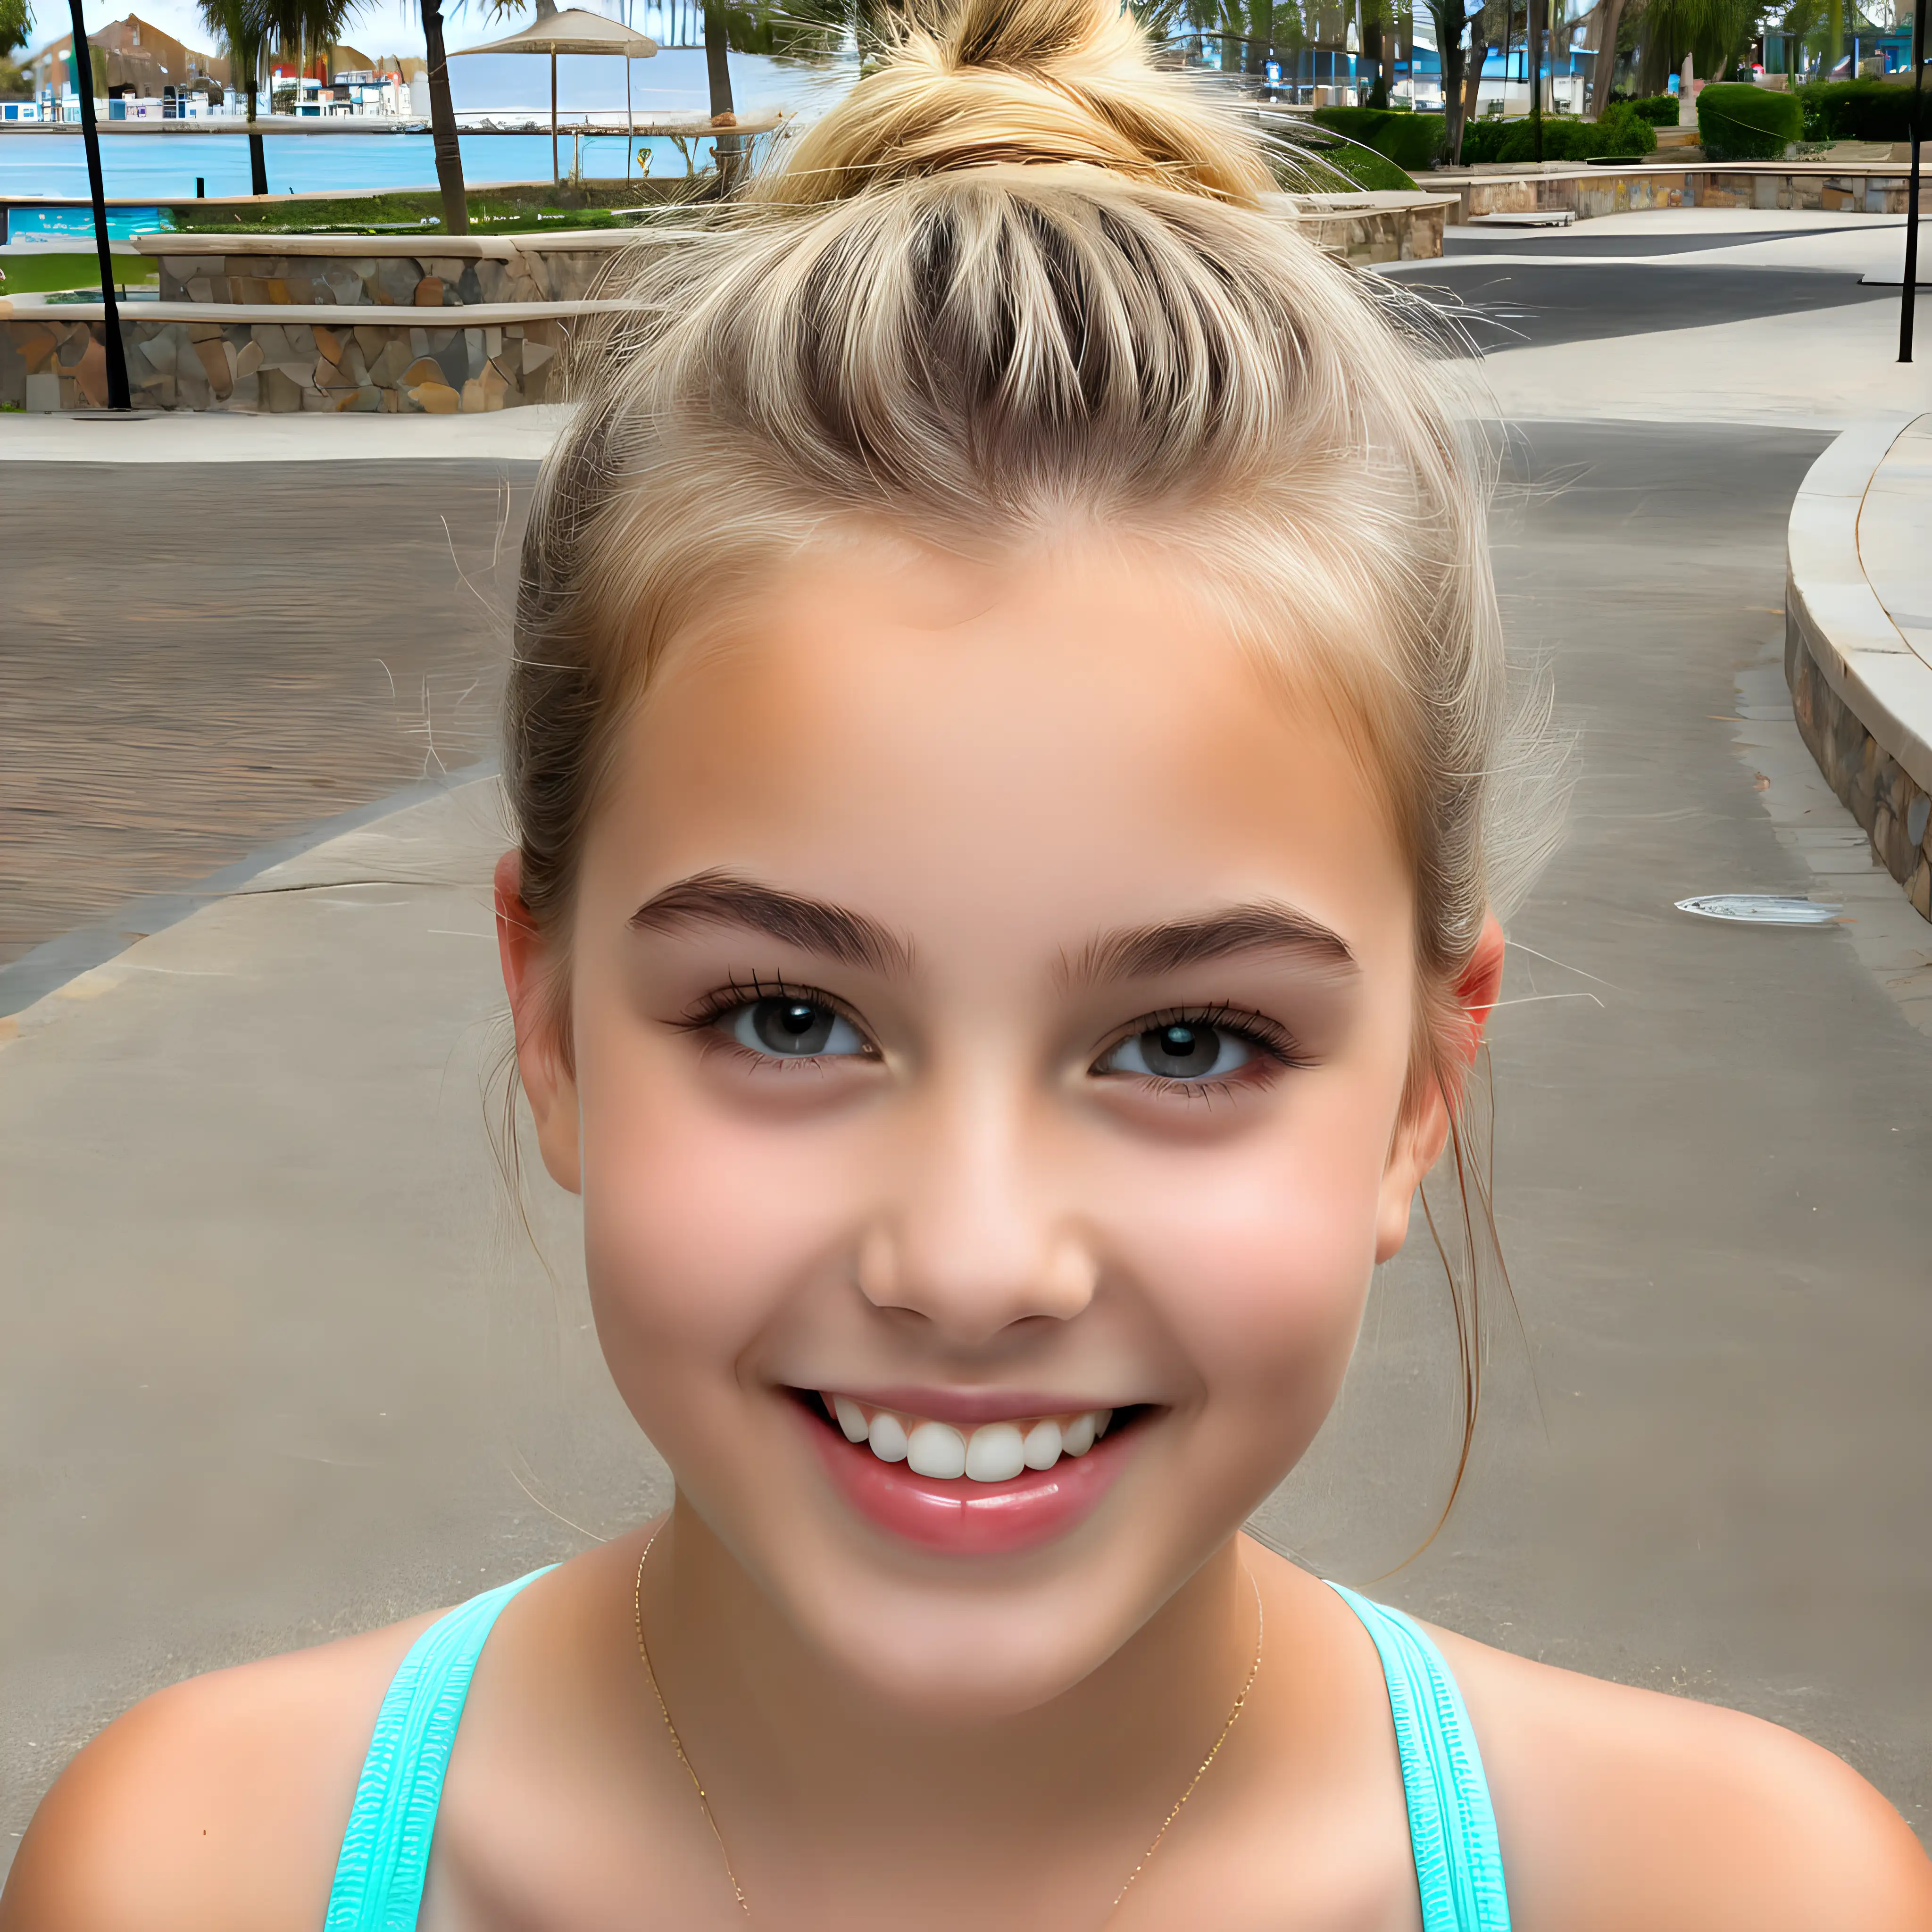 Adorable-11YearOld-White-Girl-Model-with-Cute-Chubby-Cheeks-and-Braces-Smile